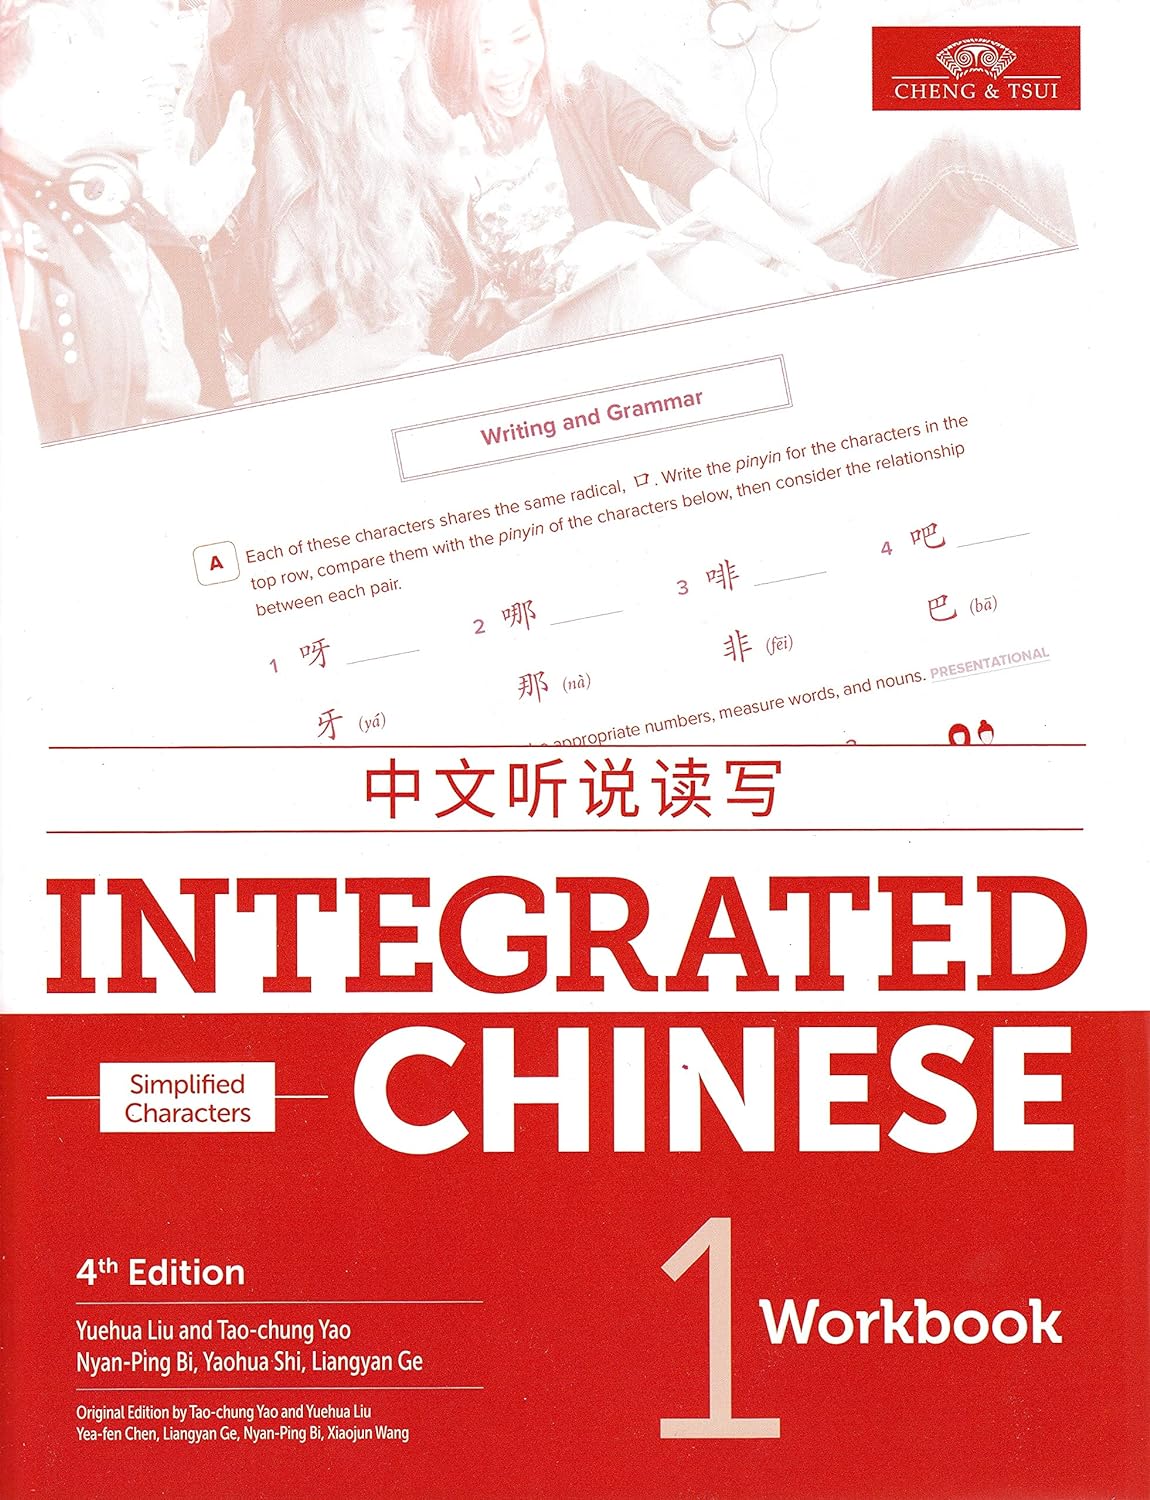 Integrated Chinese 1 - Workbook (Simplified Chinese)(4th Edition)